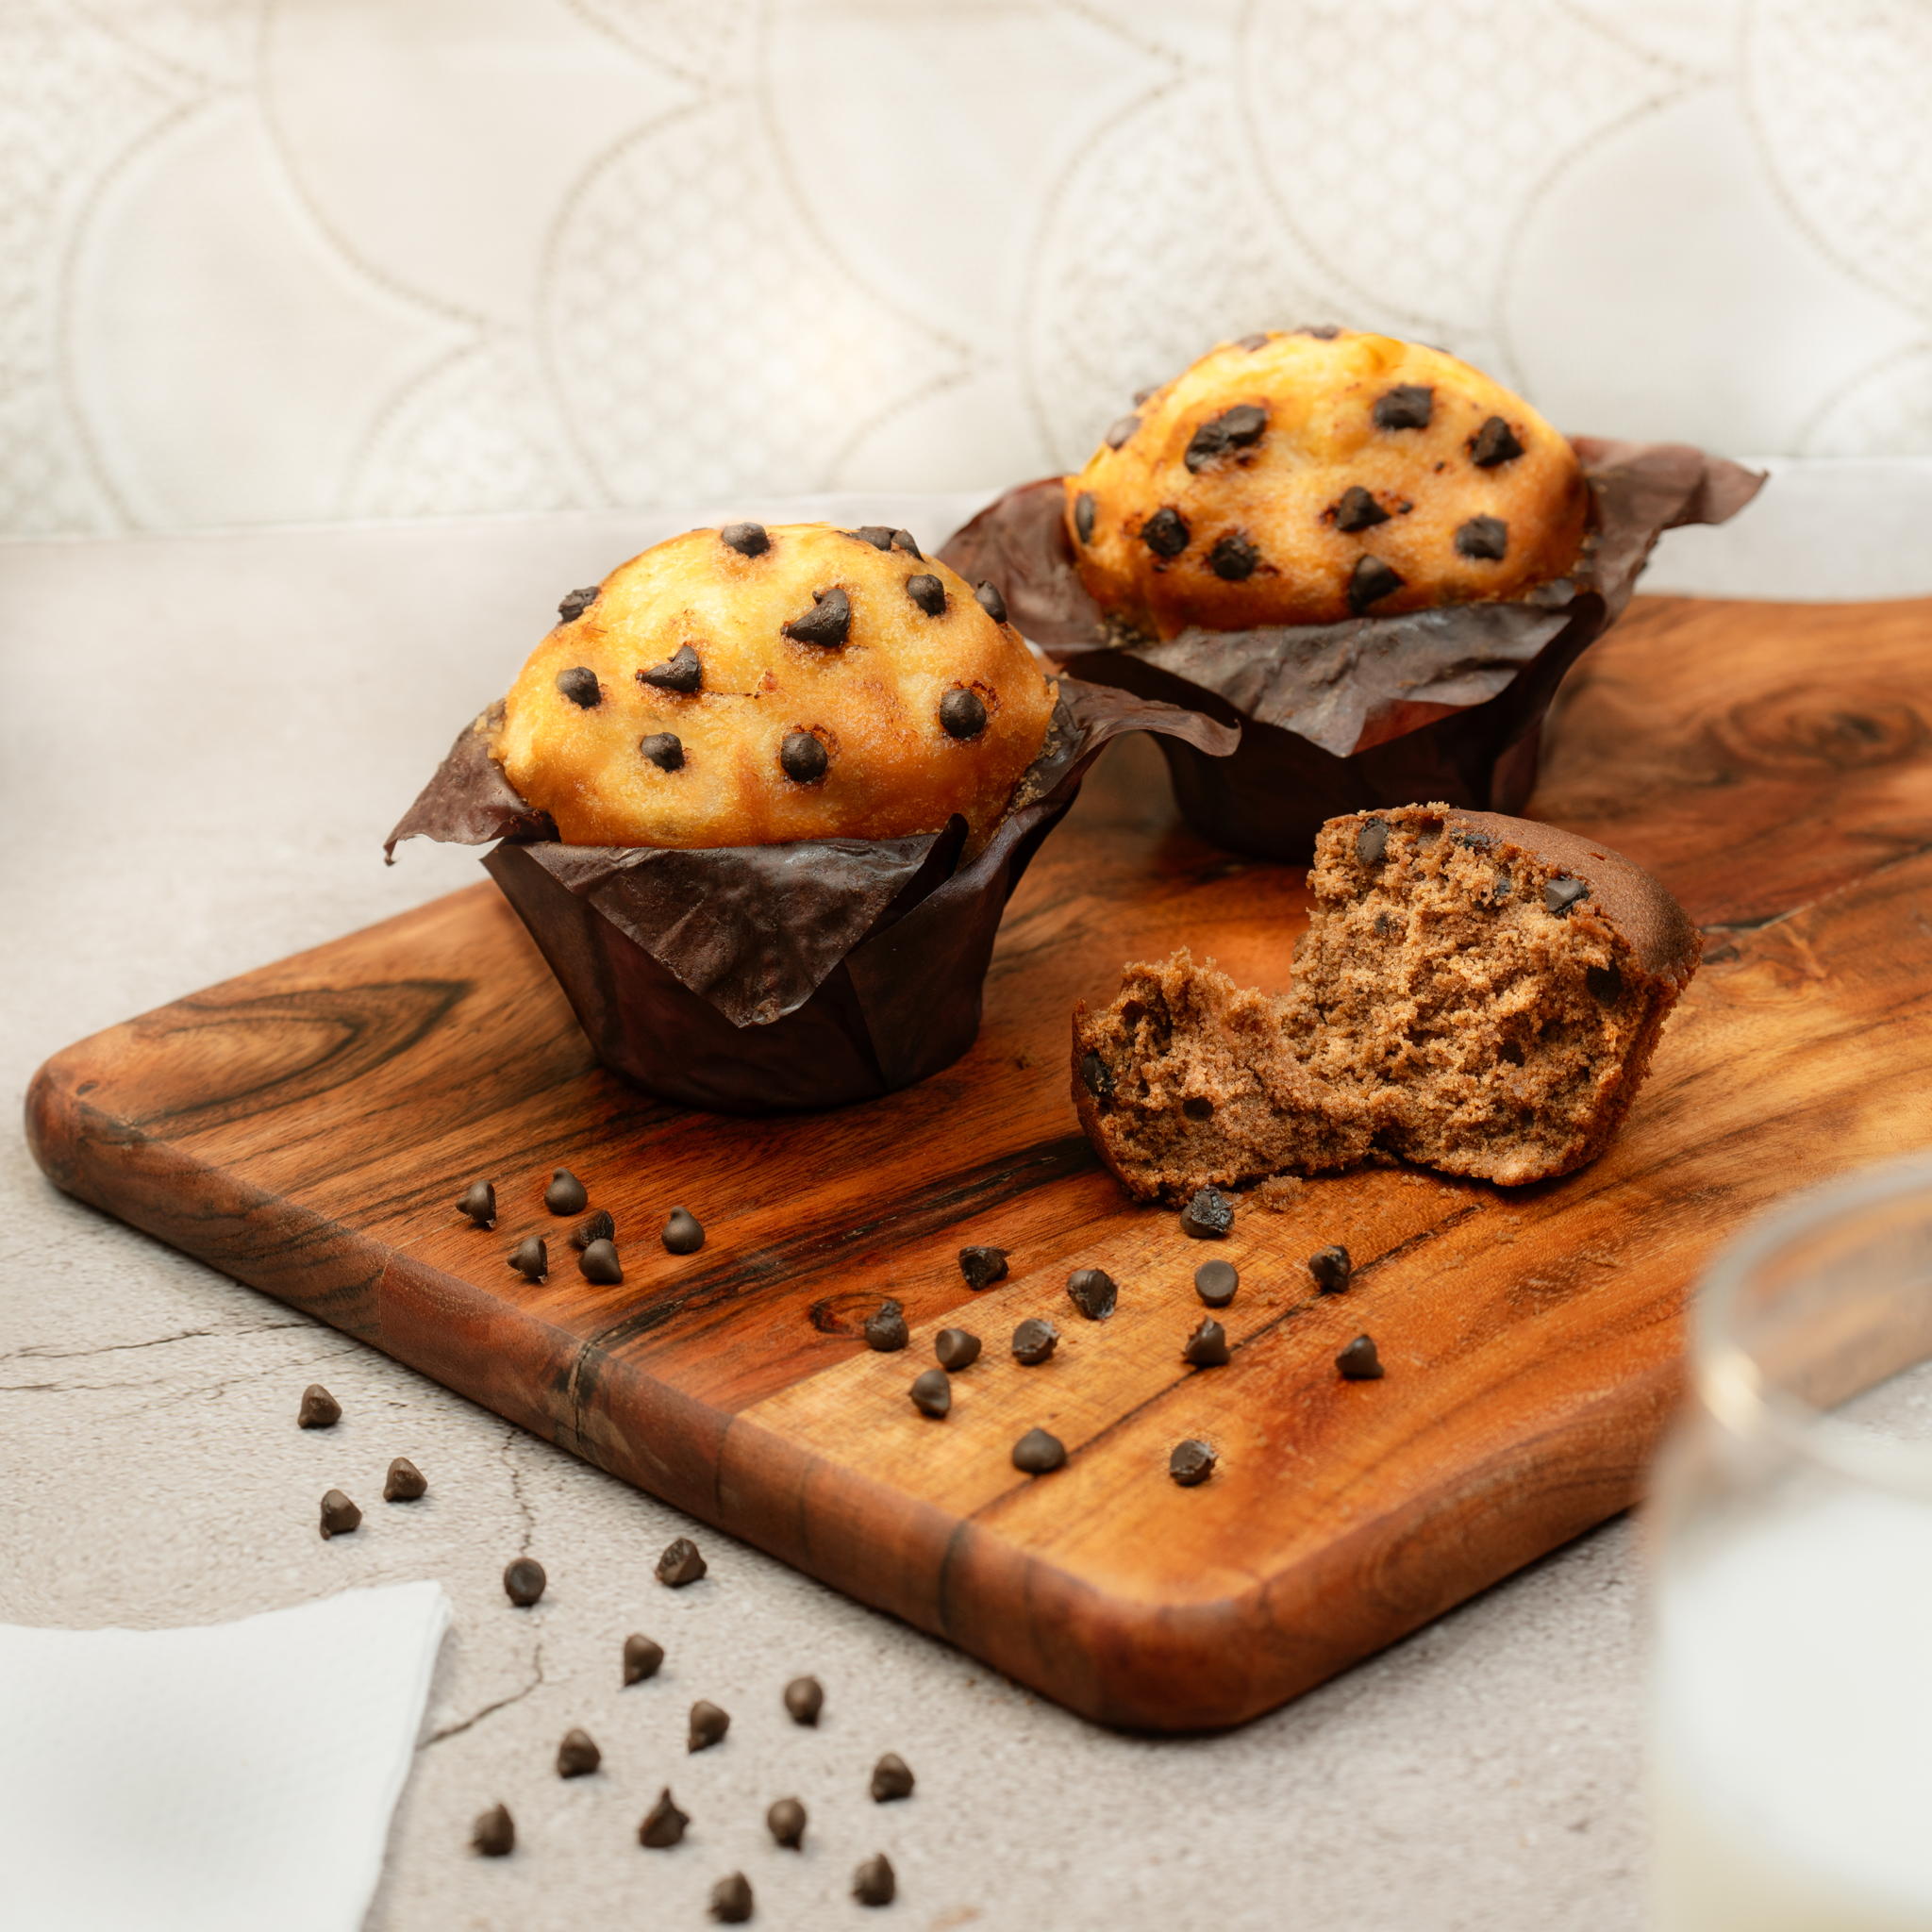 Two chocolate chip muffins, one with a bite taken out, on a wooden cutting board